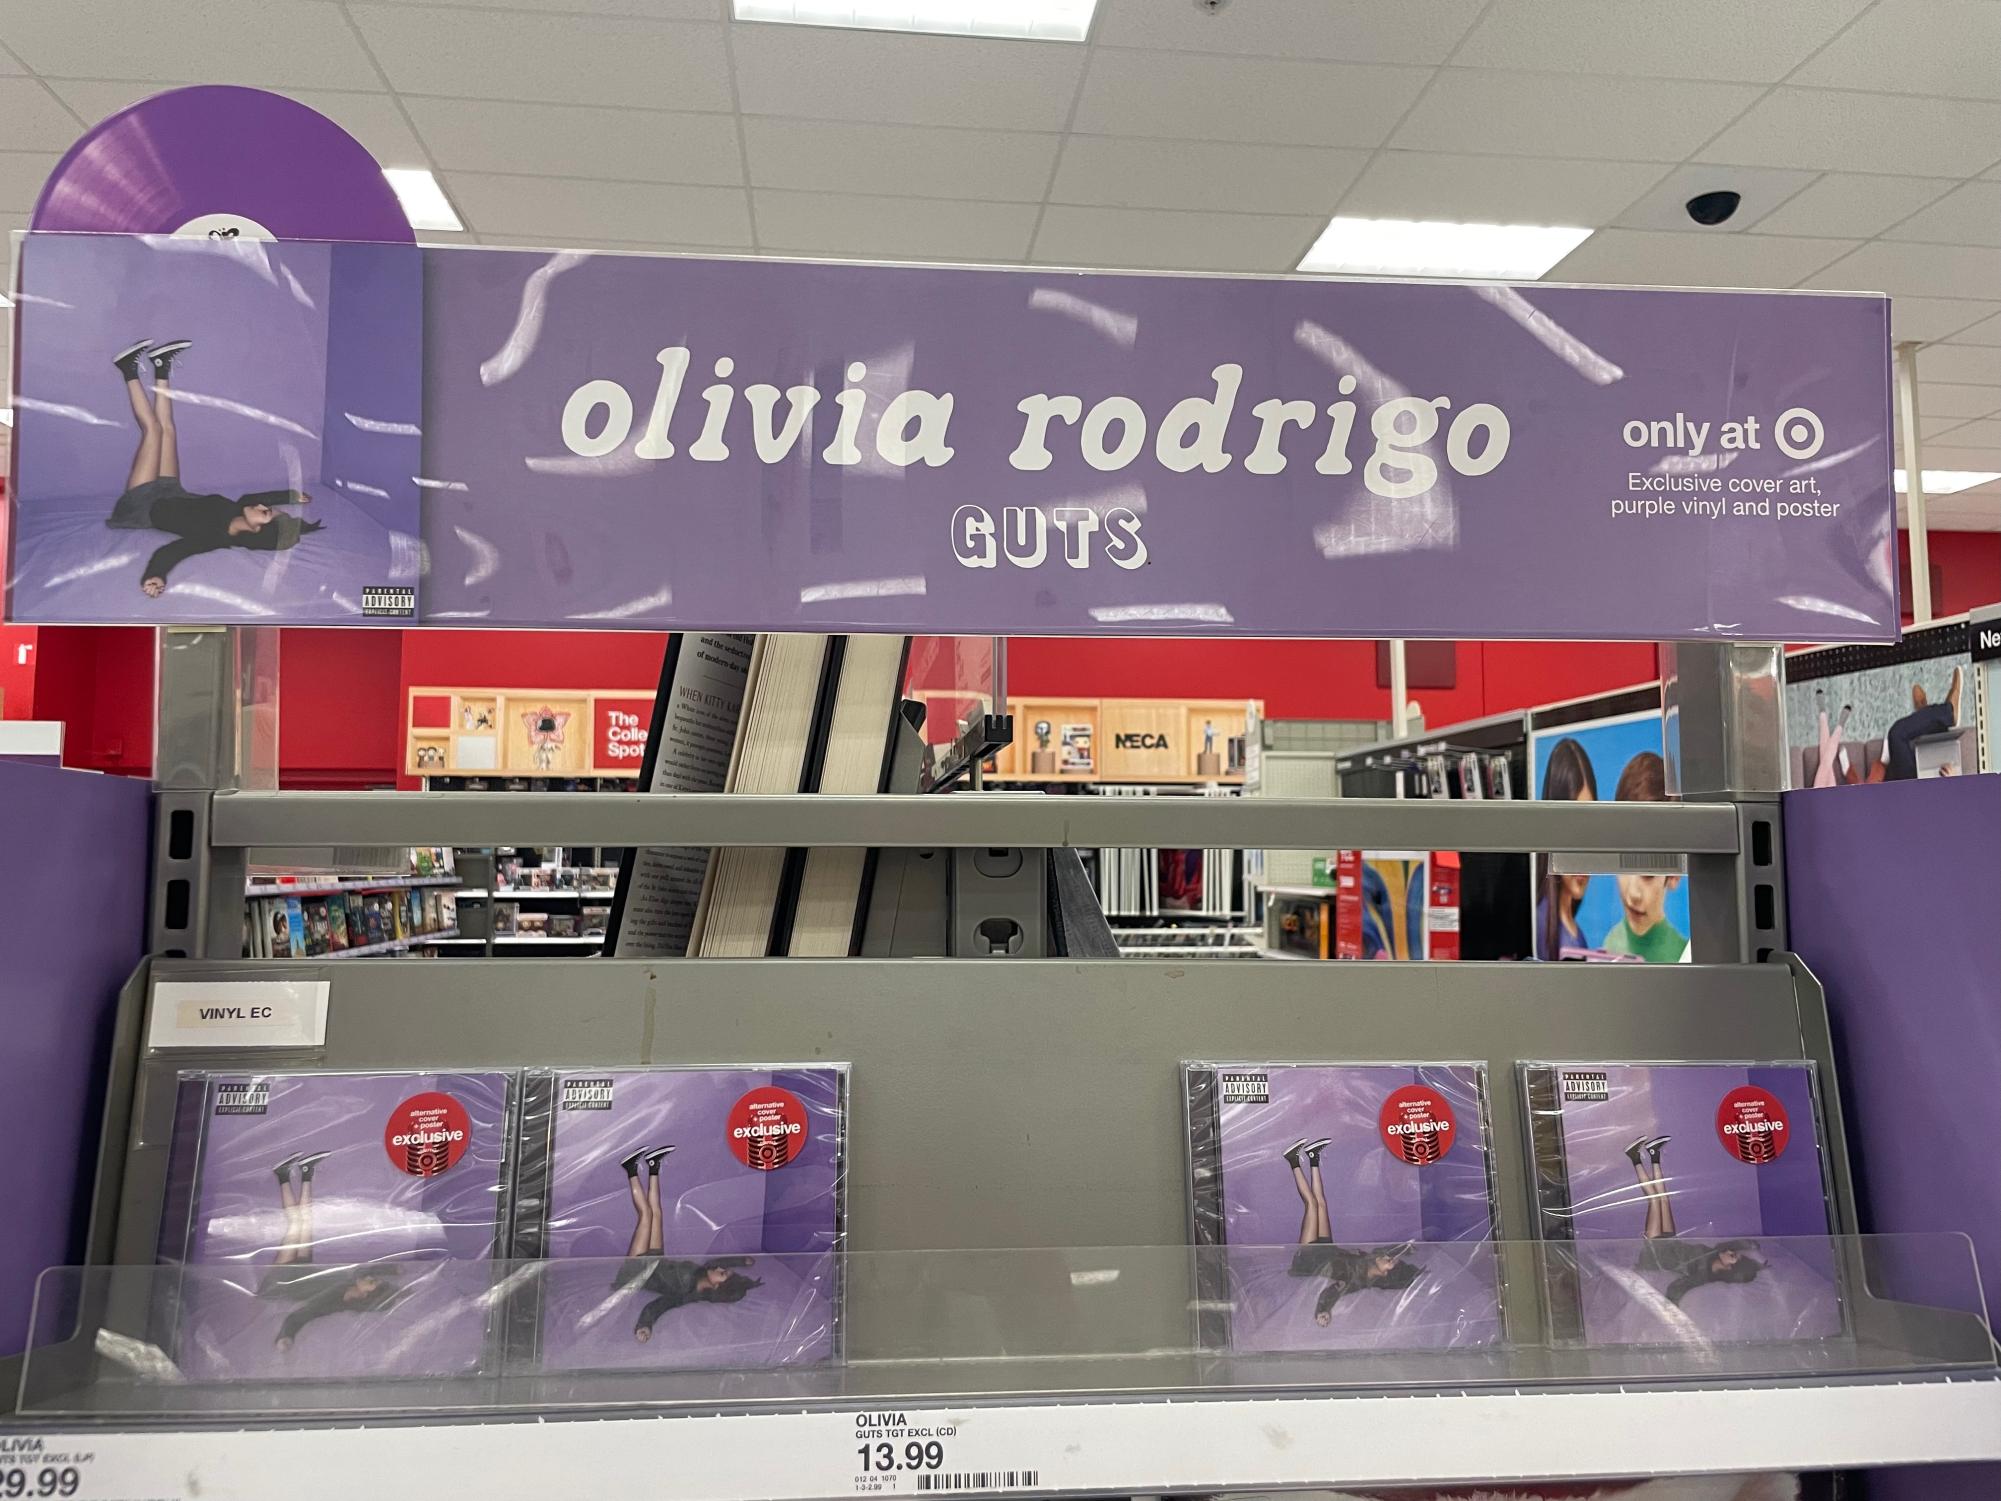 A display of Olivia Rodrigo&squot;s "GUTS" at Target stores nationwide on Sep. 13, 2023.